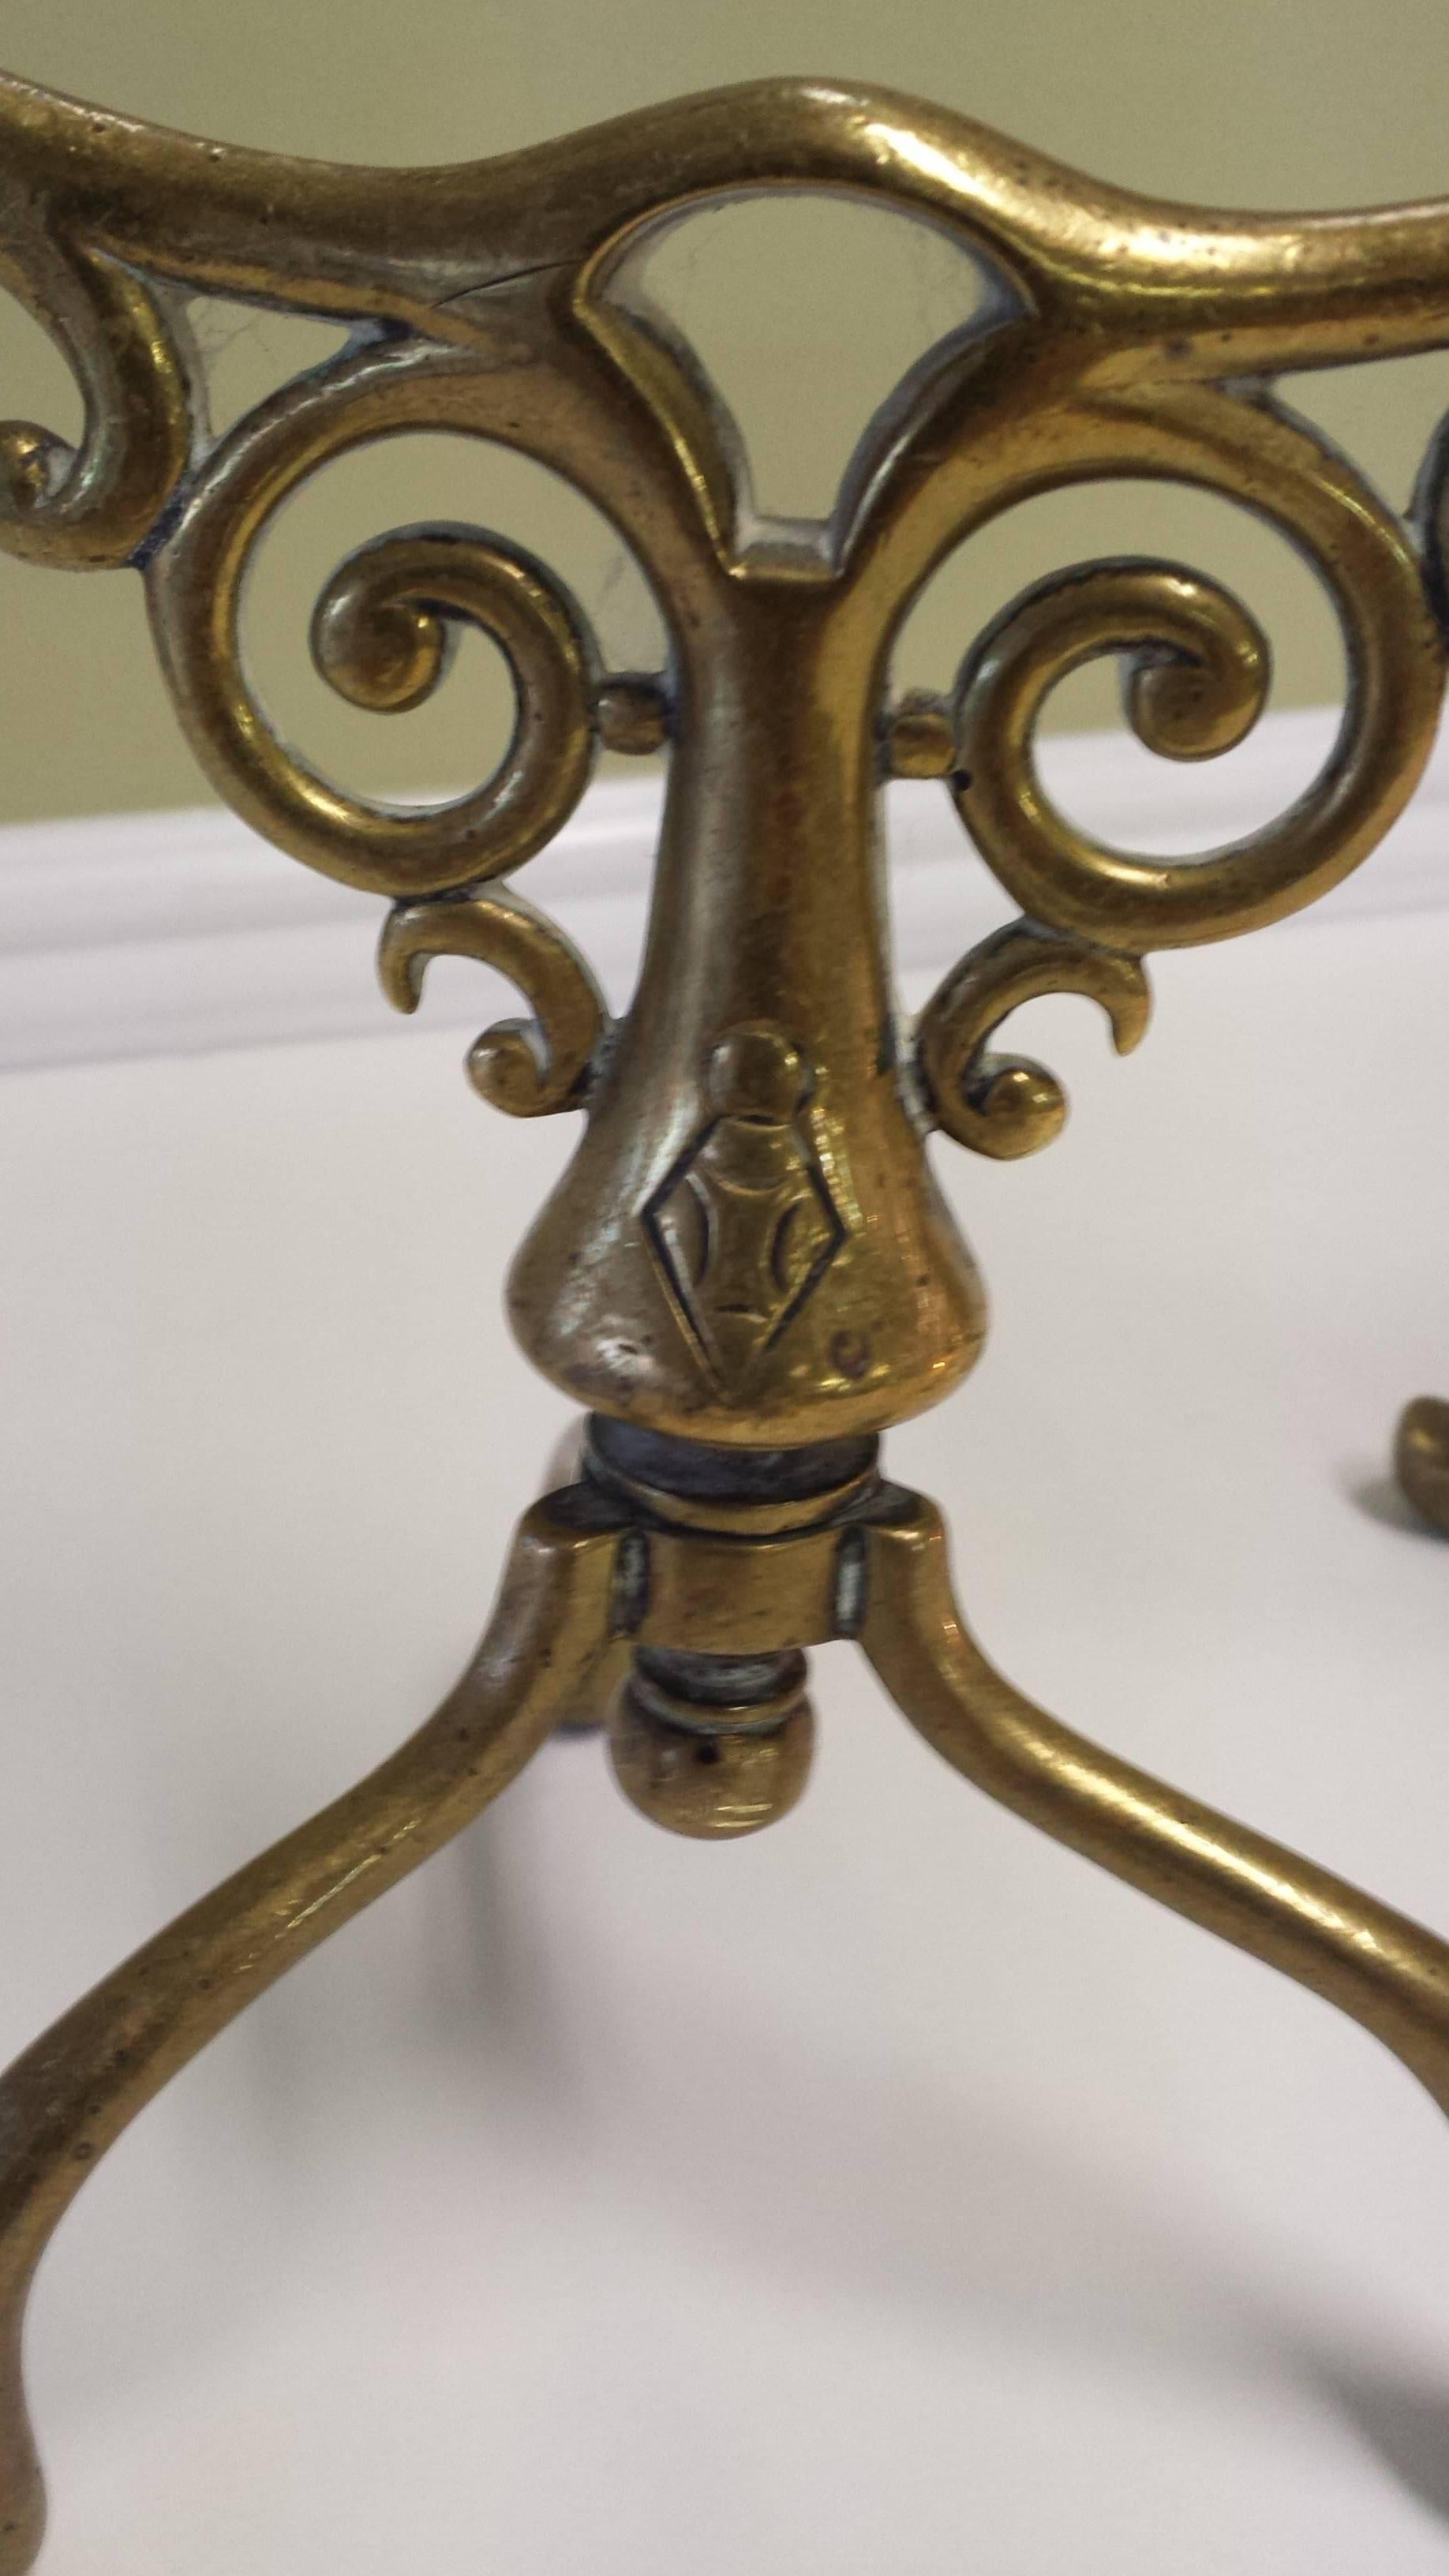 Victorian Fireplace Tool/Cooking Utensil Rests British Registration Marks, Made of Solid Brass, Very decorative, and could be used in another application. The British marks are polished out from years of use and are unreadable, The registration